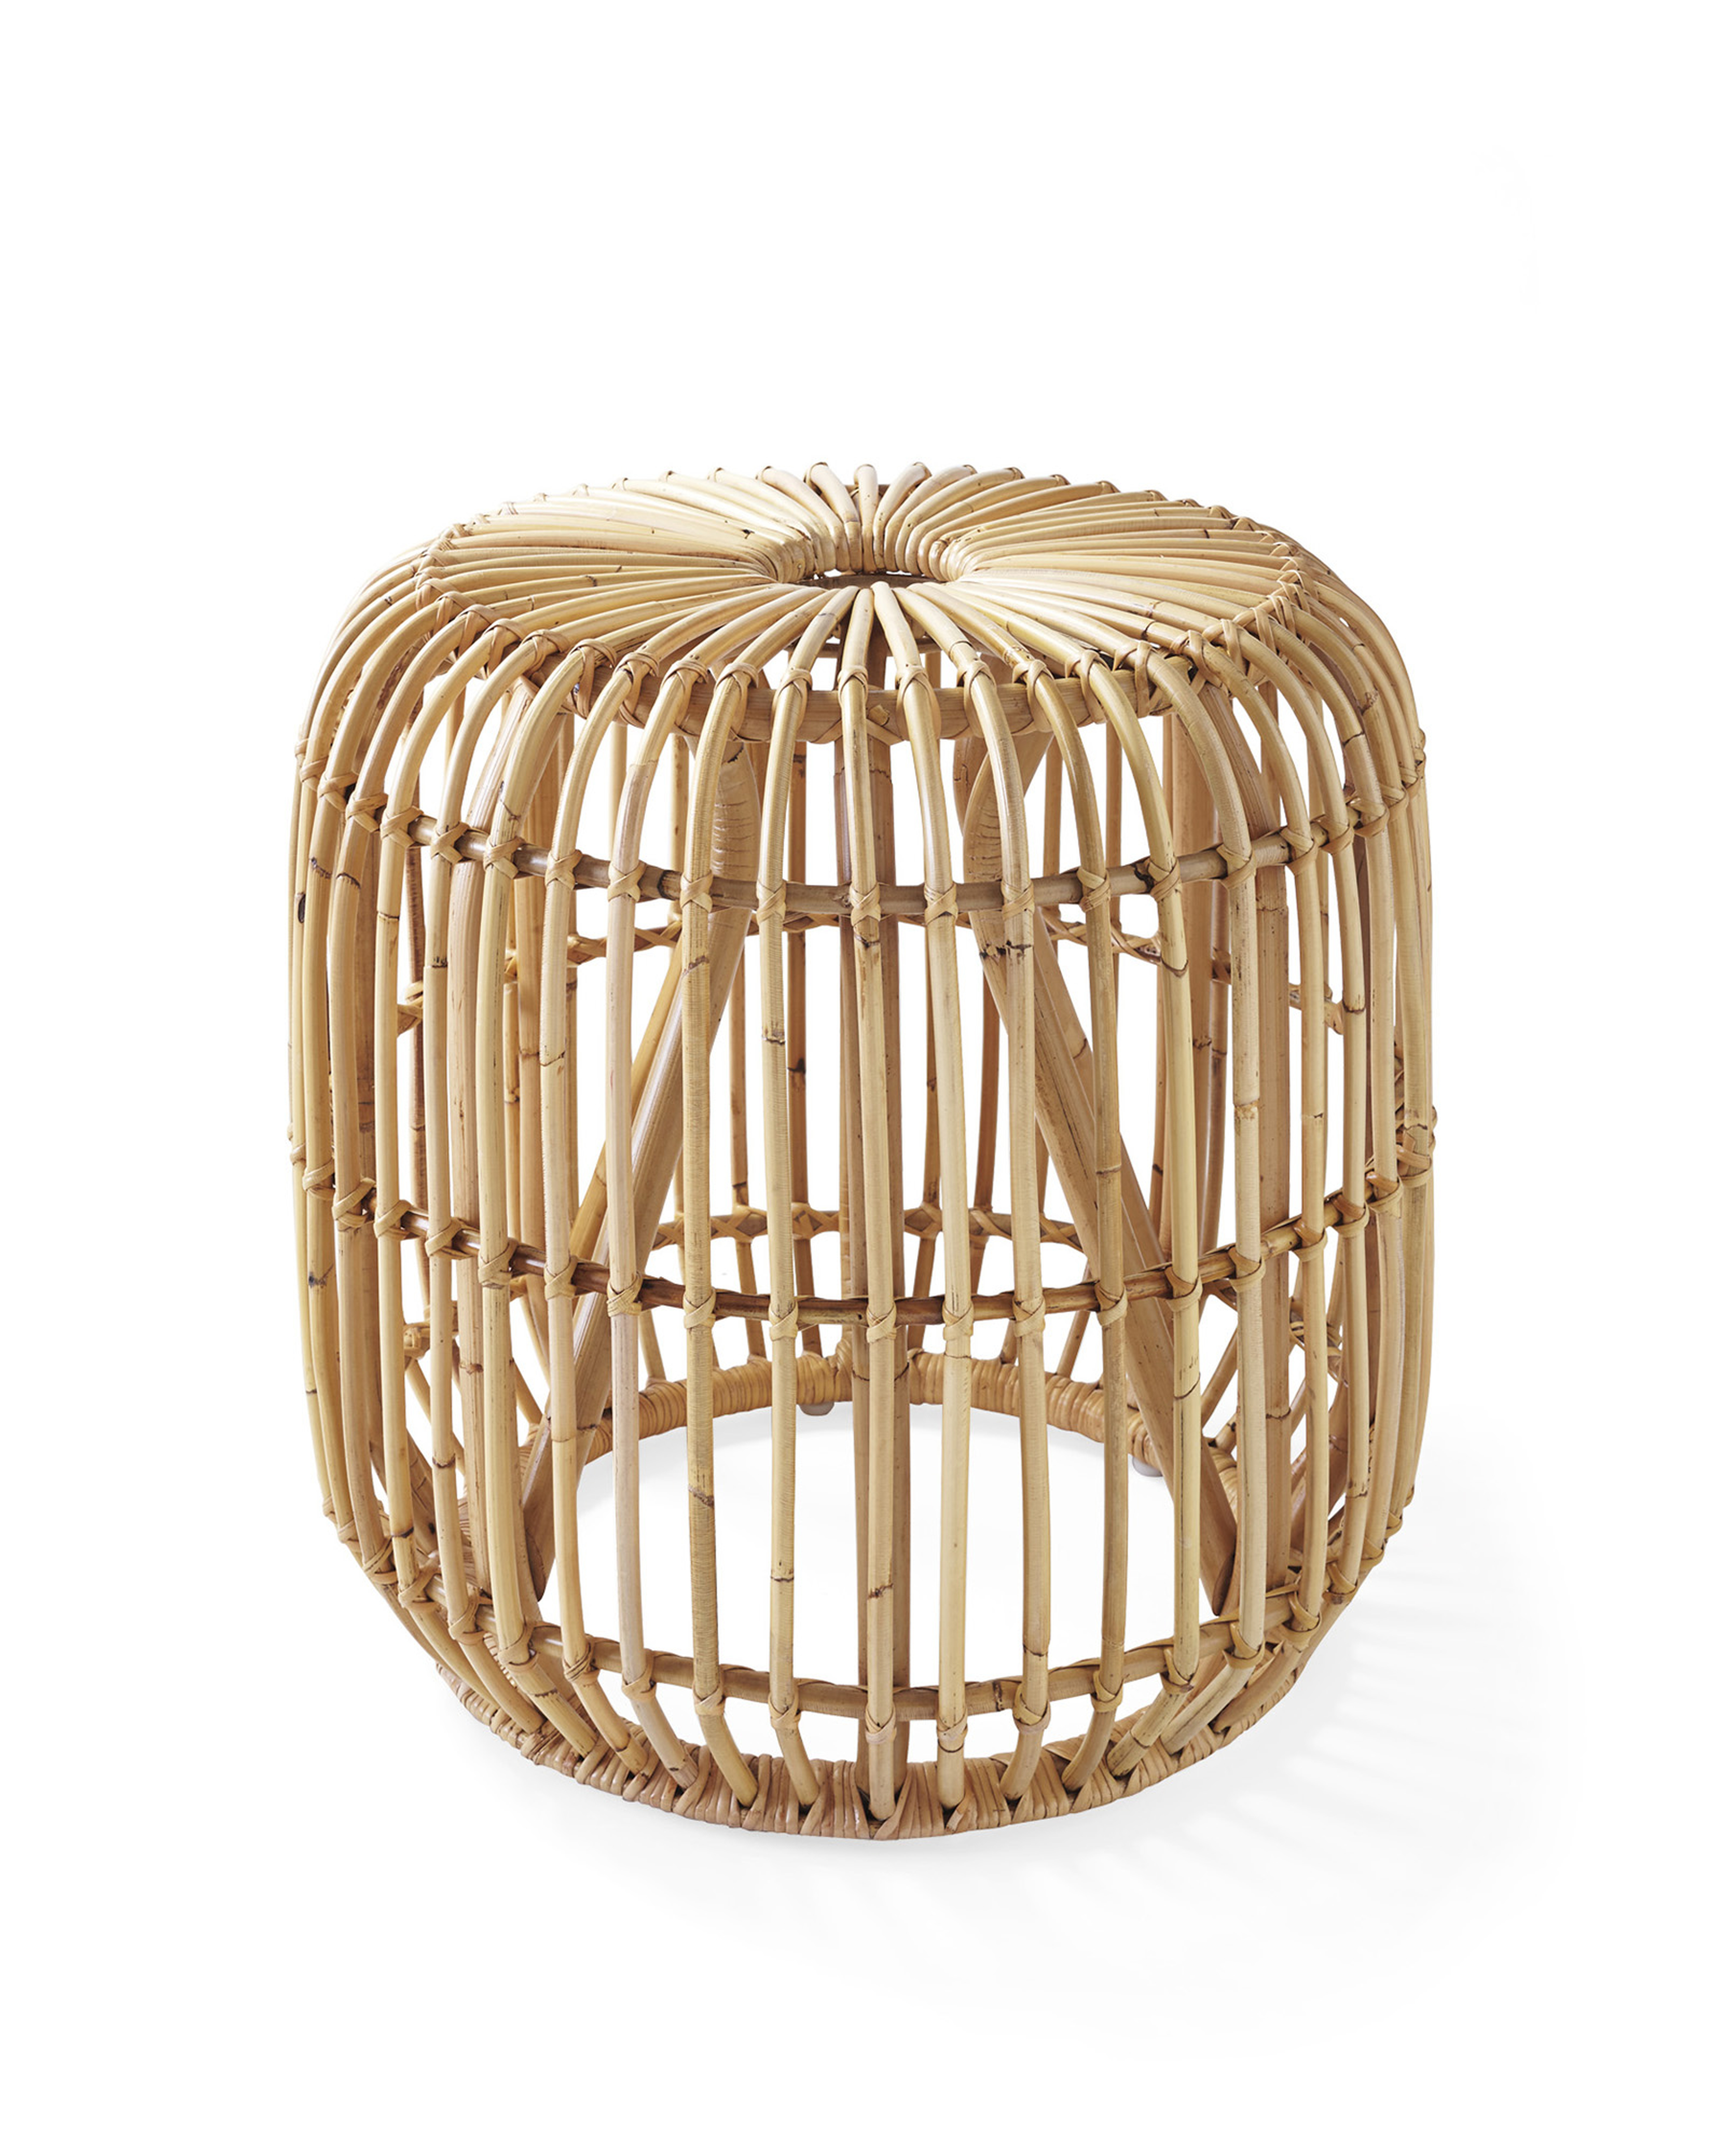 Pismo Rattan Side Table - Serena and Lily